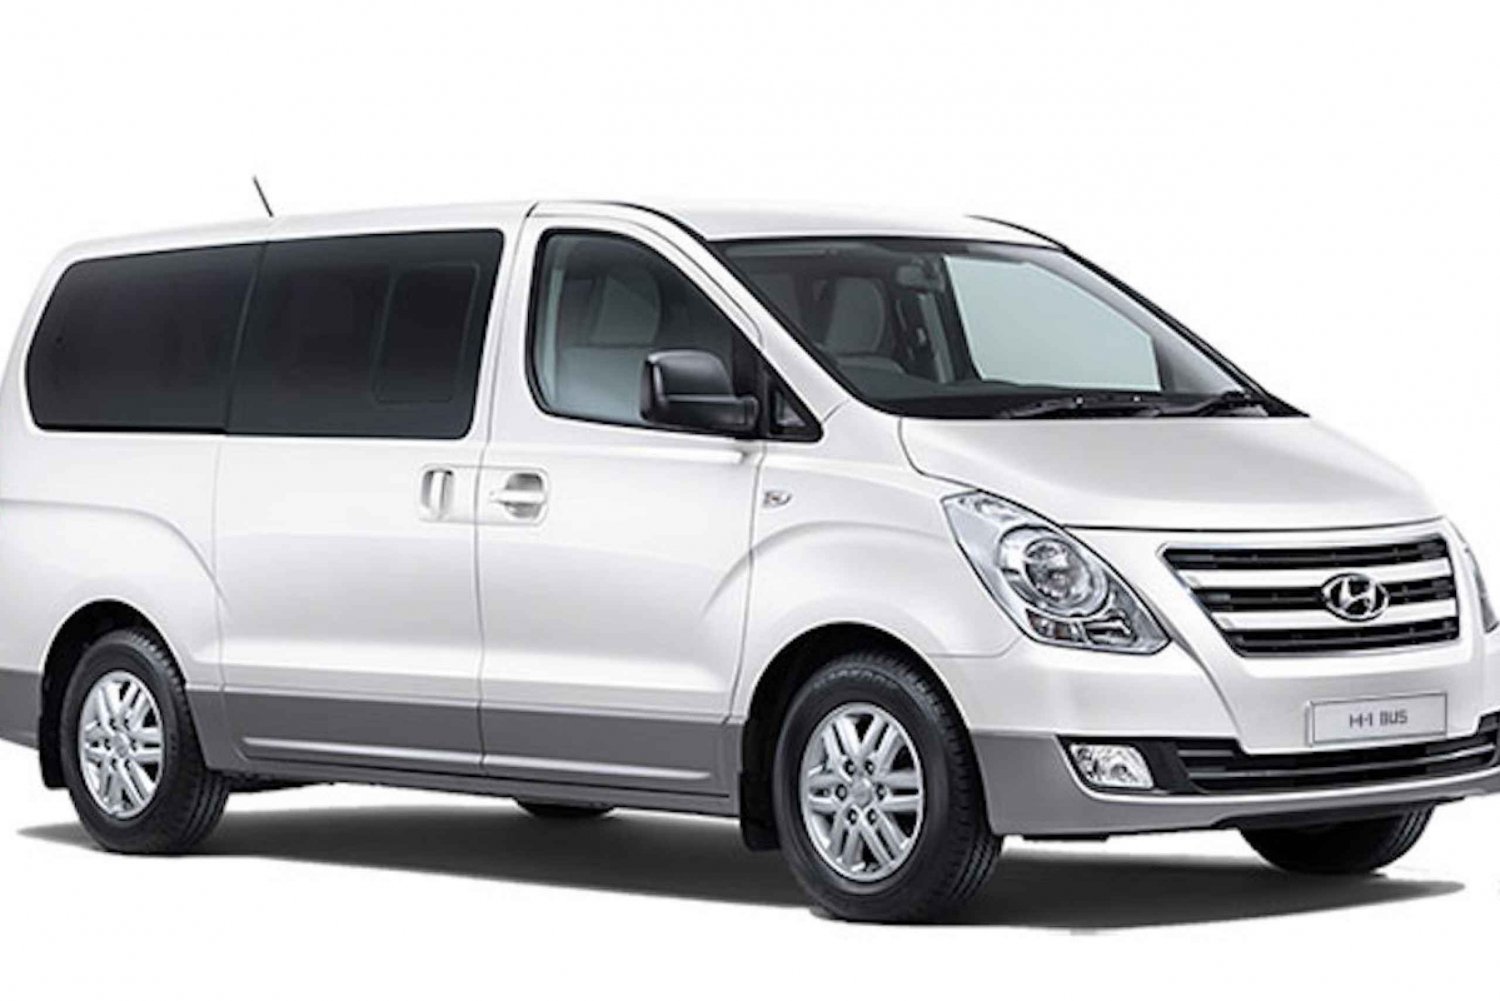 Bangkok: Full-Day Private Car with Professional Driver